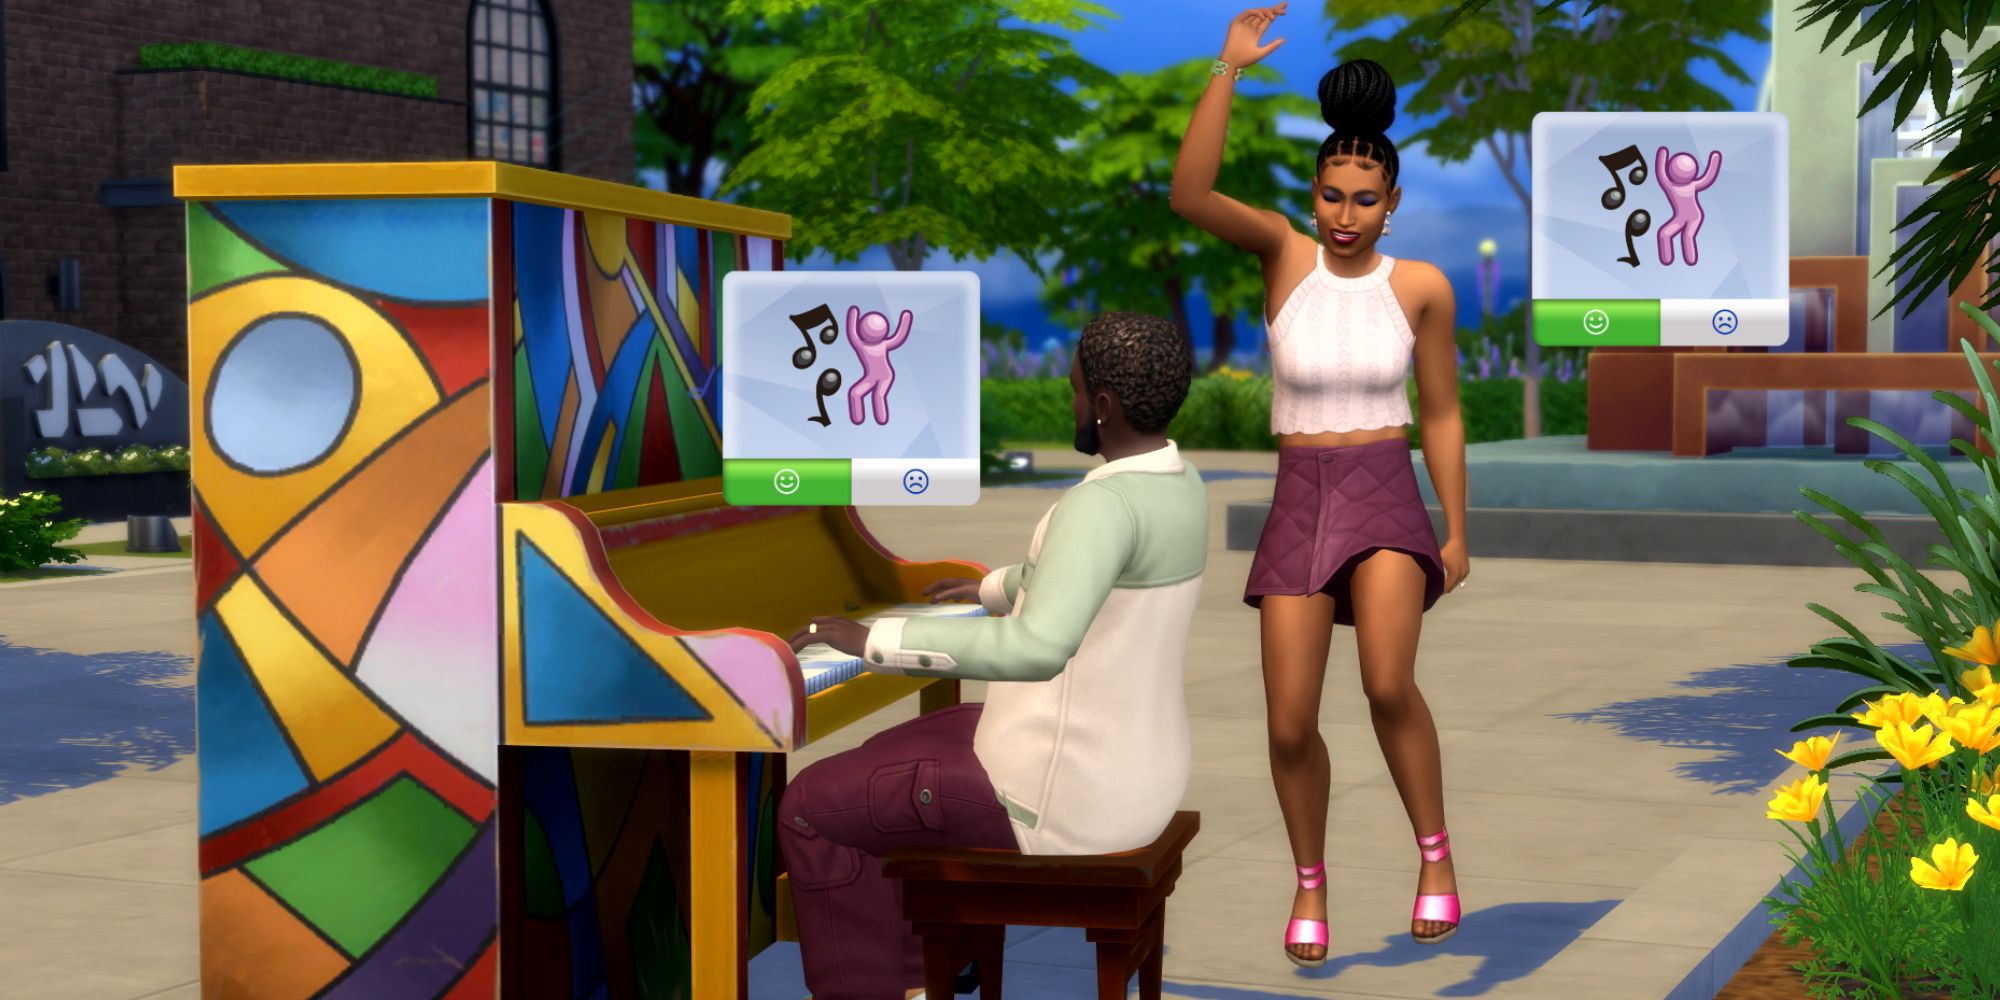 The Sims 4 Growing Together A Sim playing an upright piano on the street